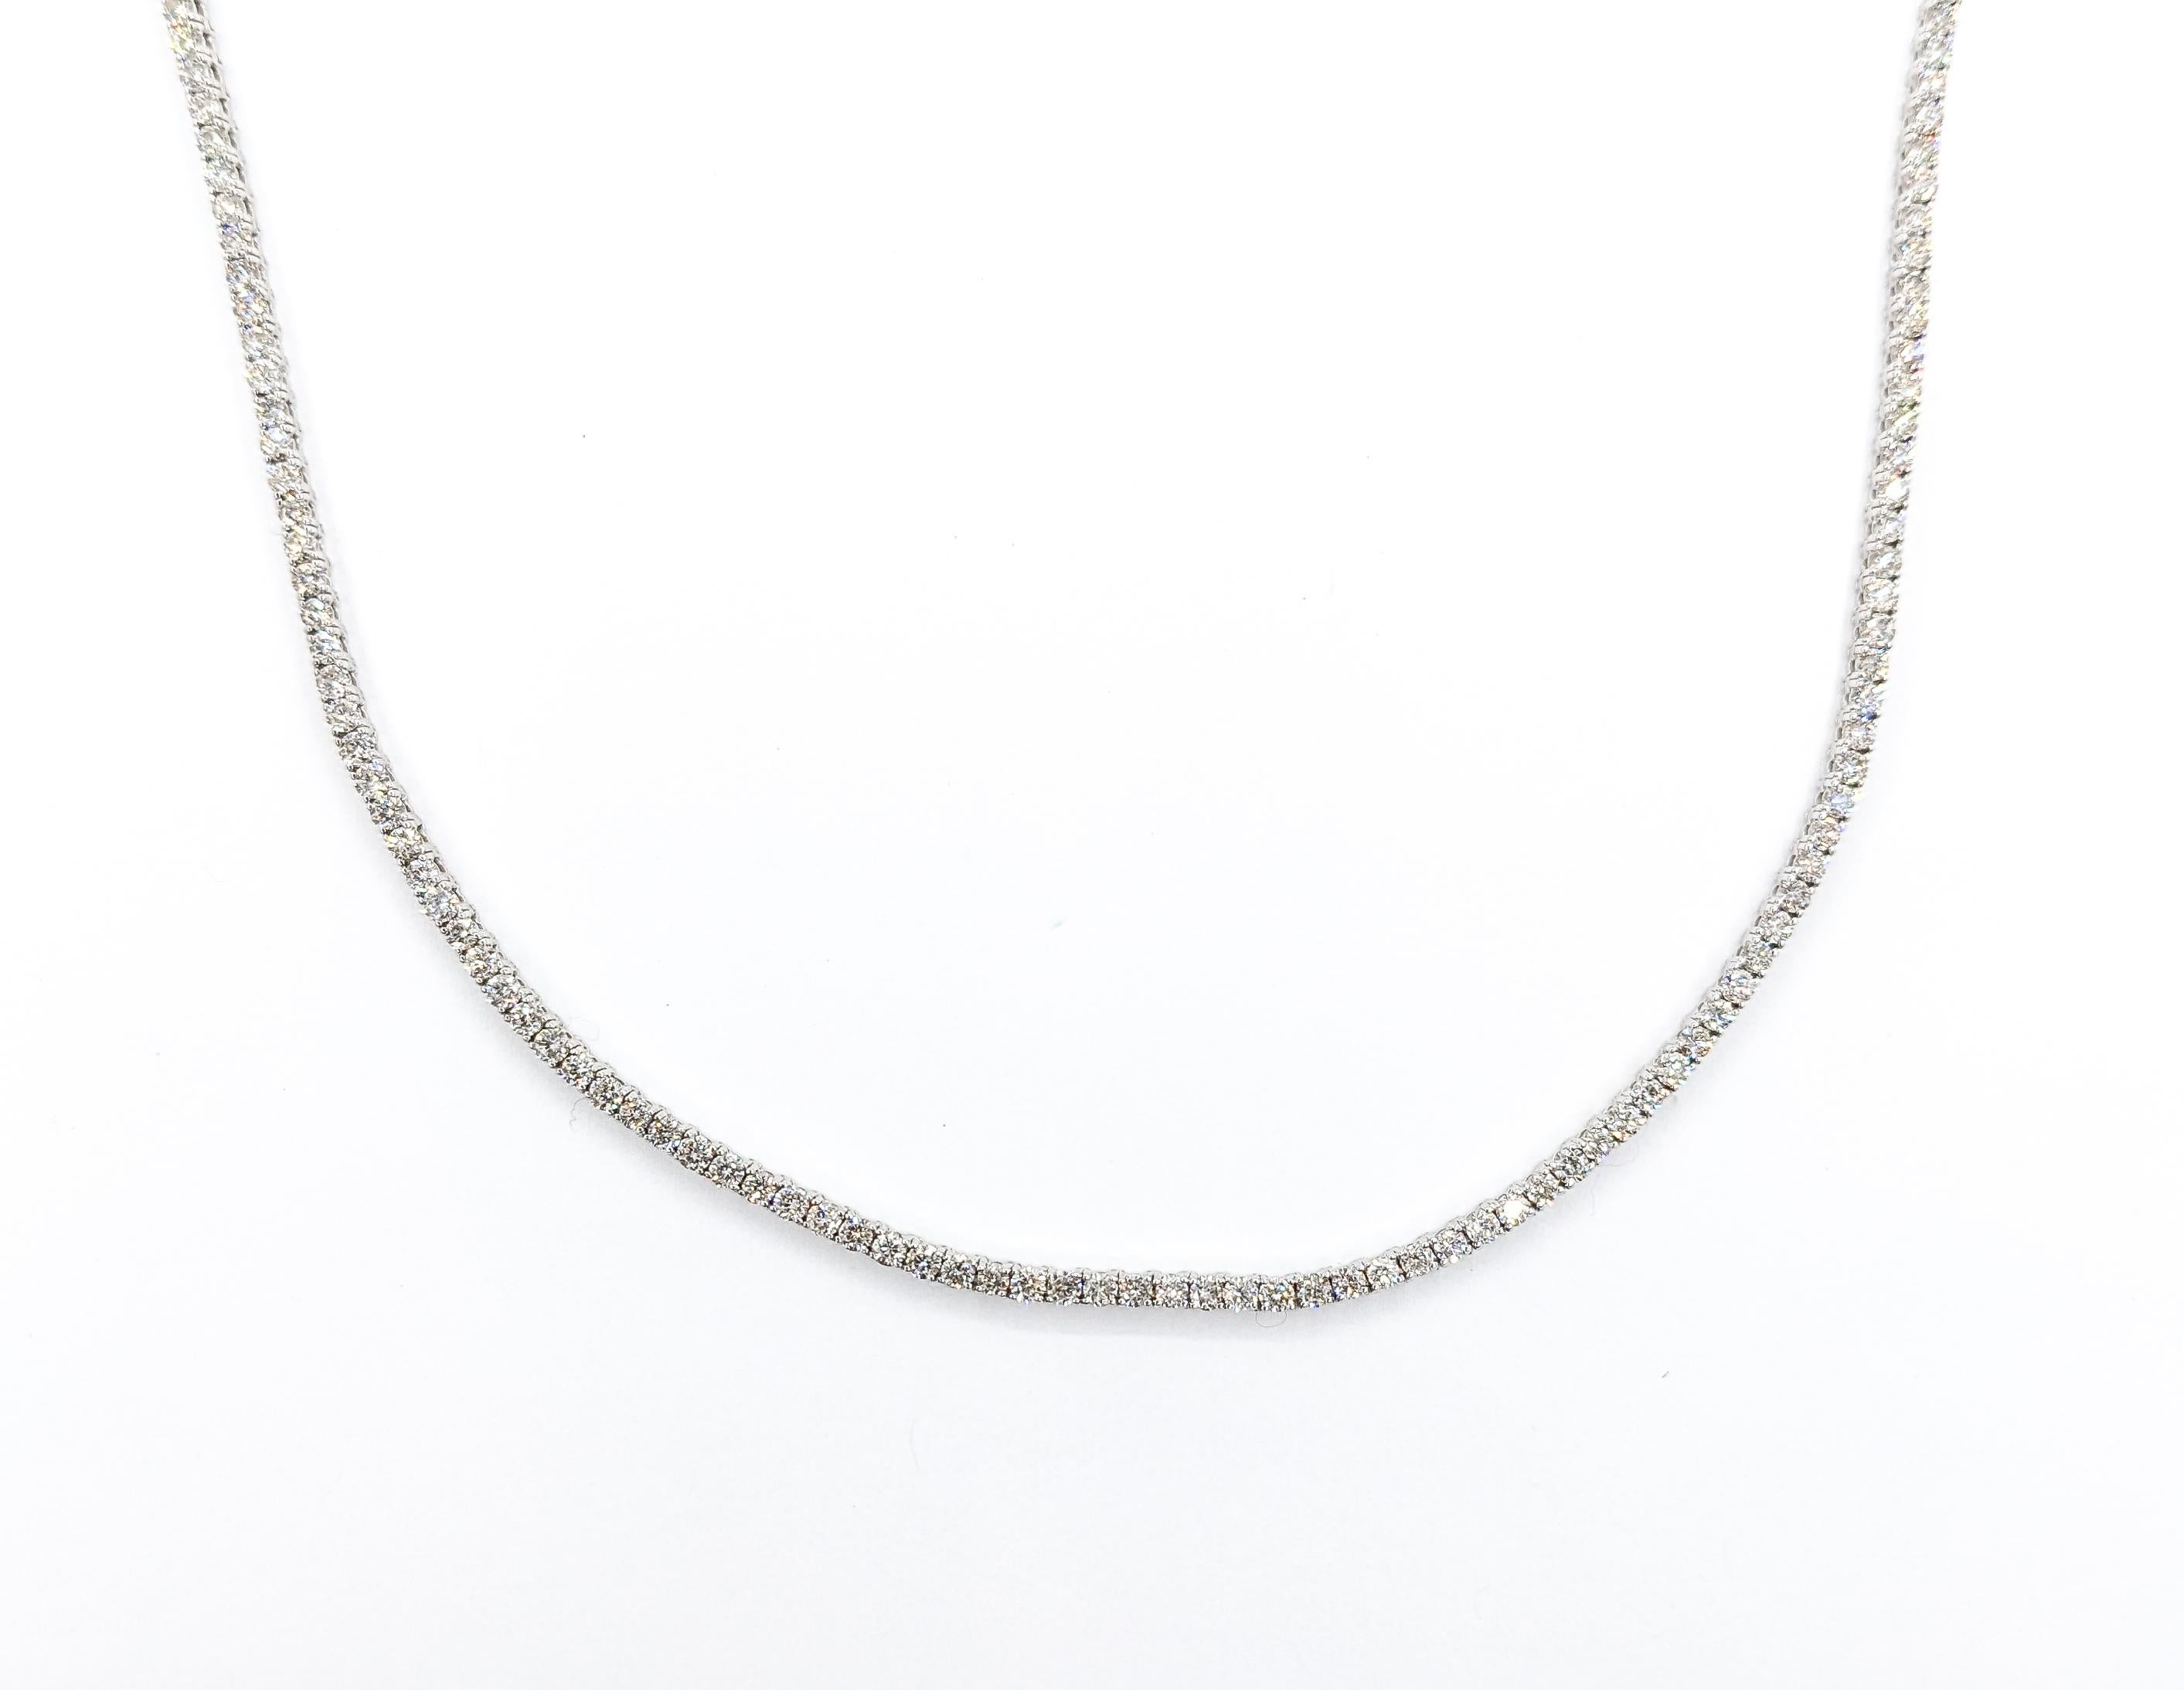 8ctw Diamond Tennis Necklace in White Gold

Experience the allure of sophistication with this magnificent tennis necklace, expertly crafted in 14kt white gold. Adorned with a dazzling array of diamonds totaling 7.97ctw, each stone sparkles with SI-I